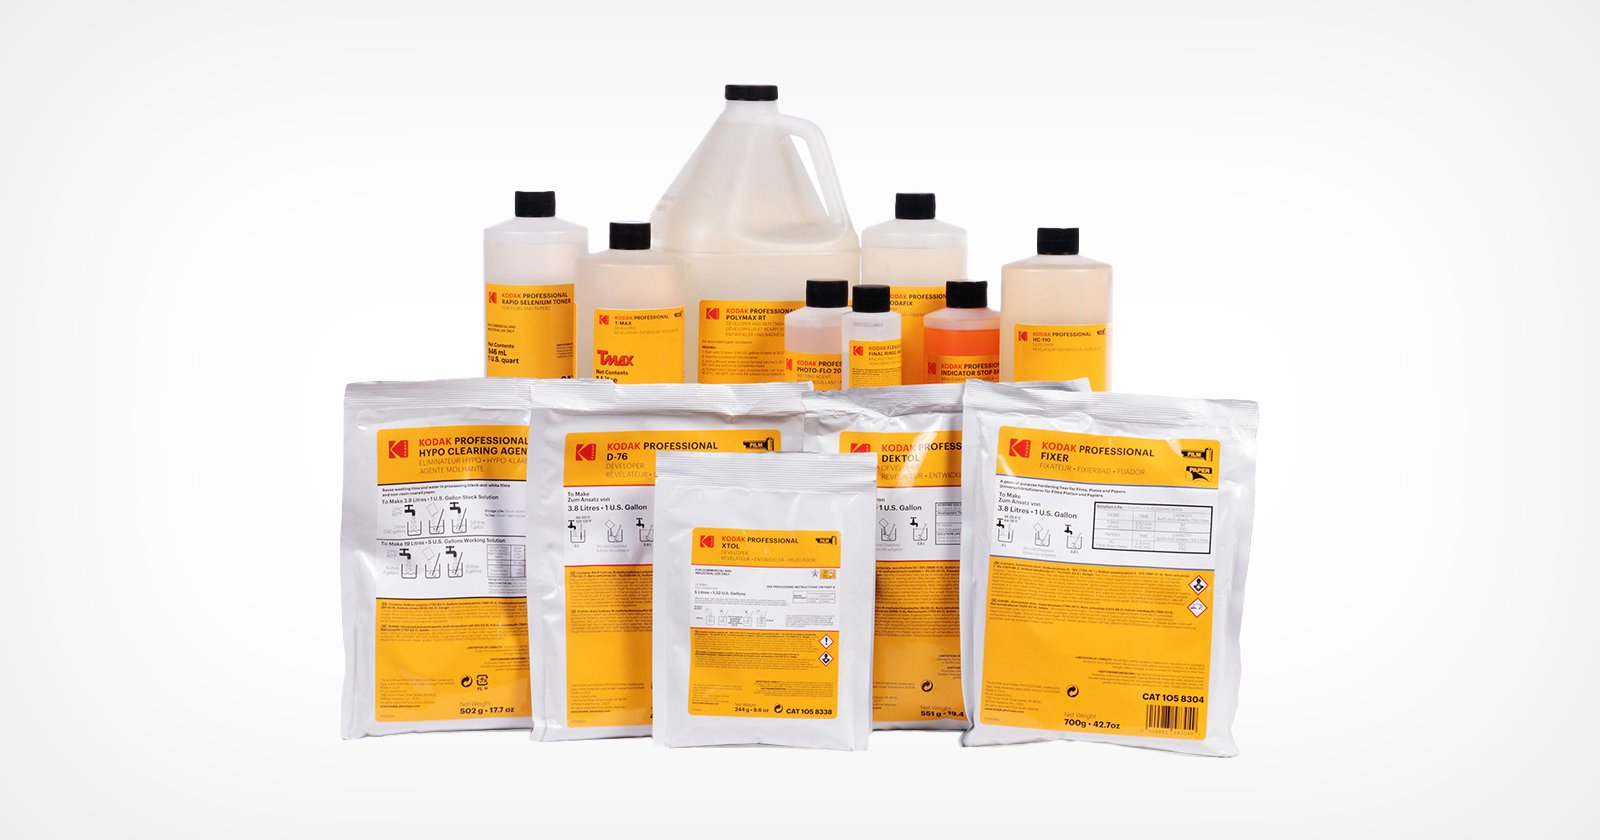 Bags and bottles of Kodak Professional Photo Chemicals against a white background.